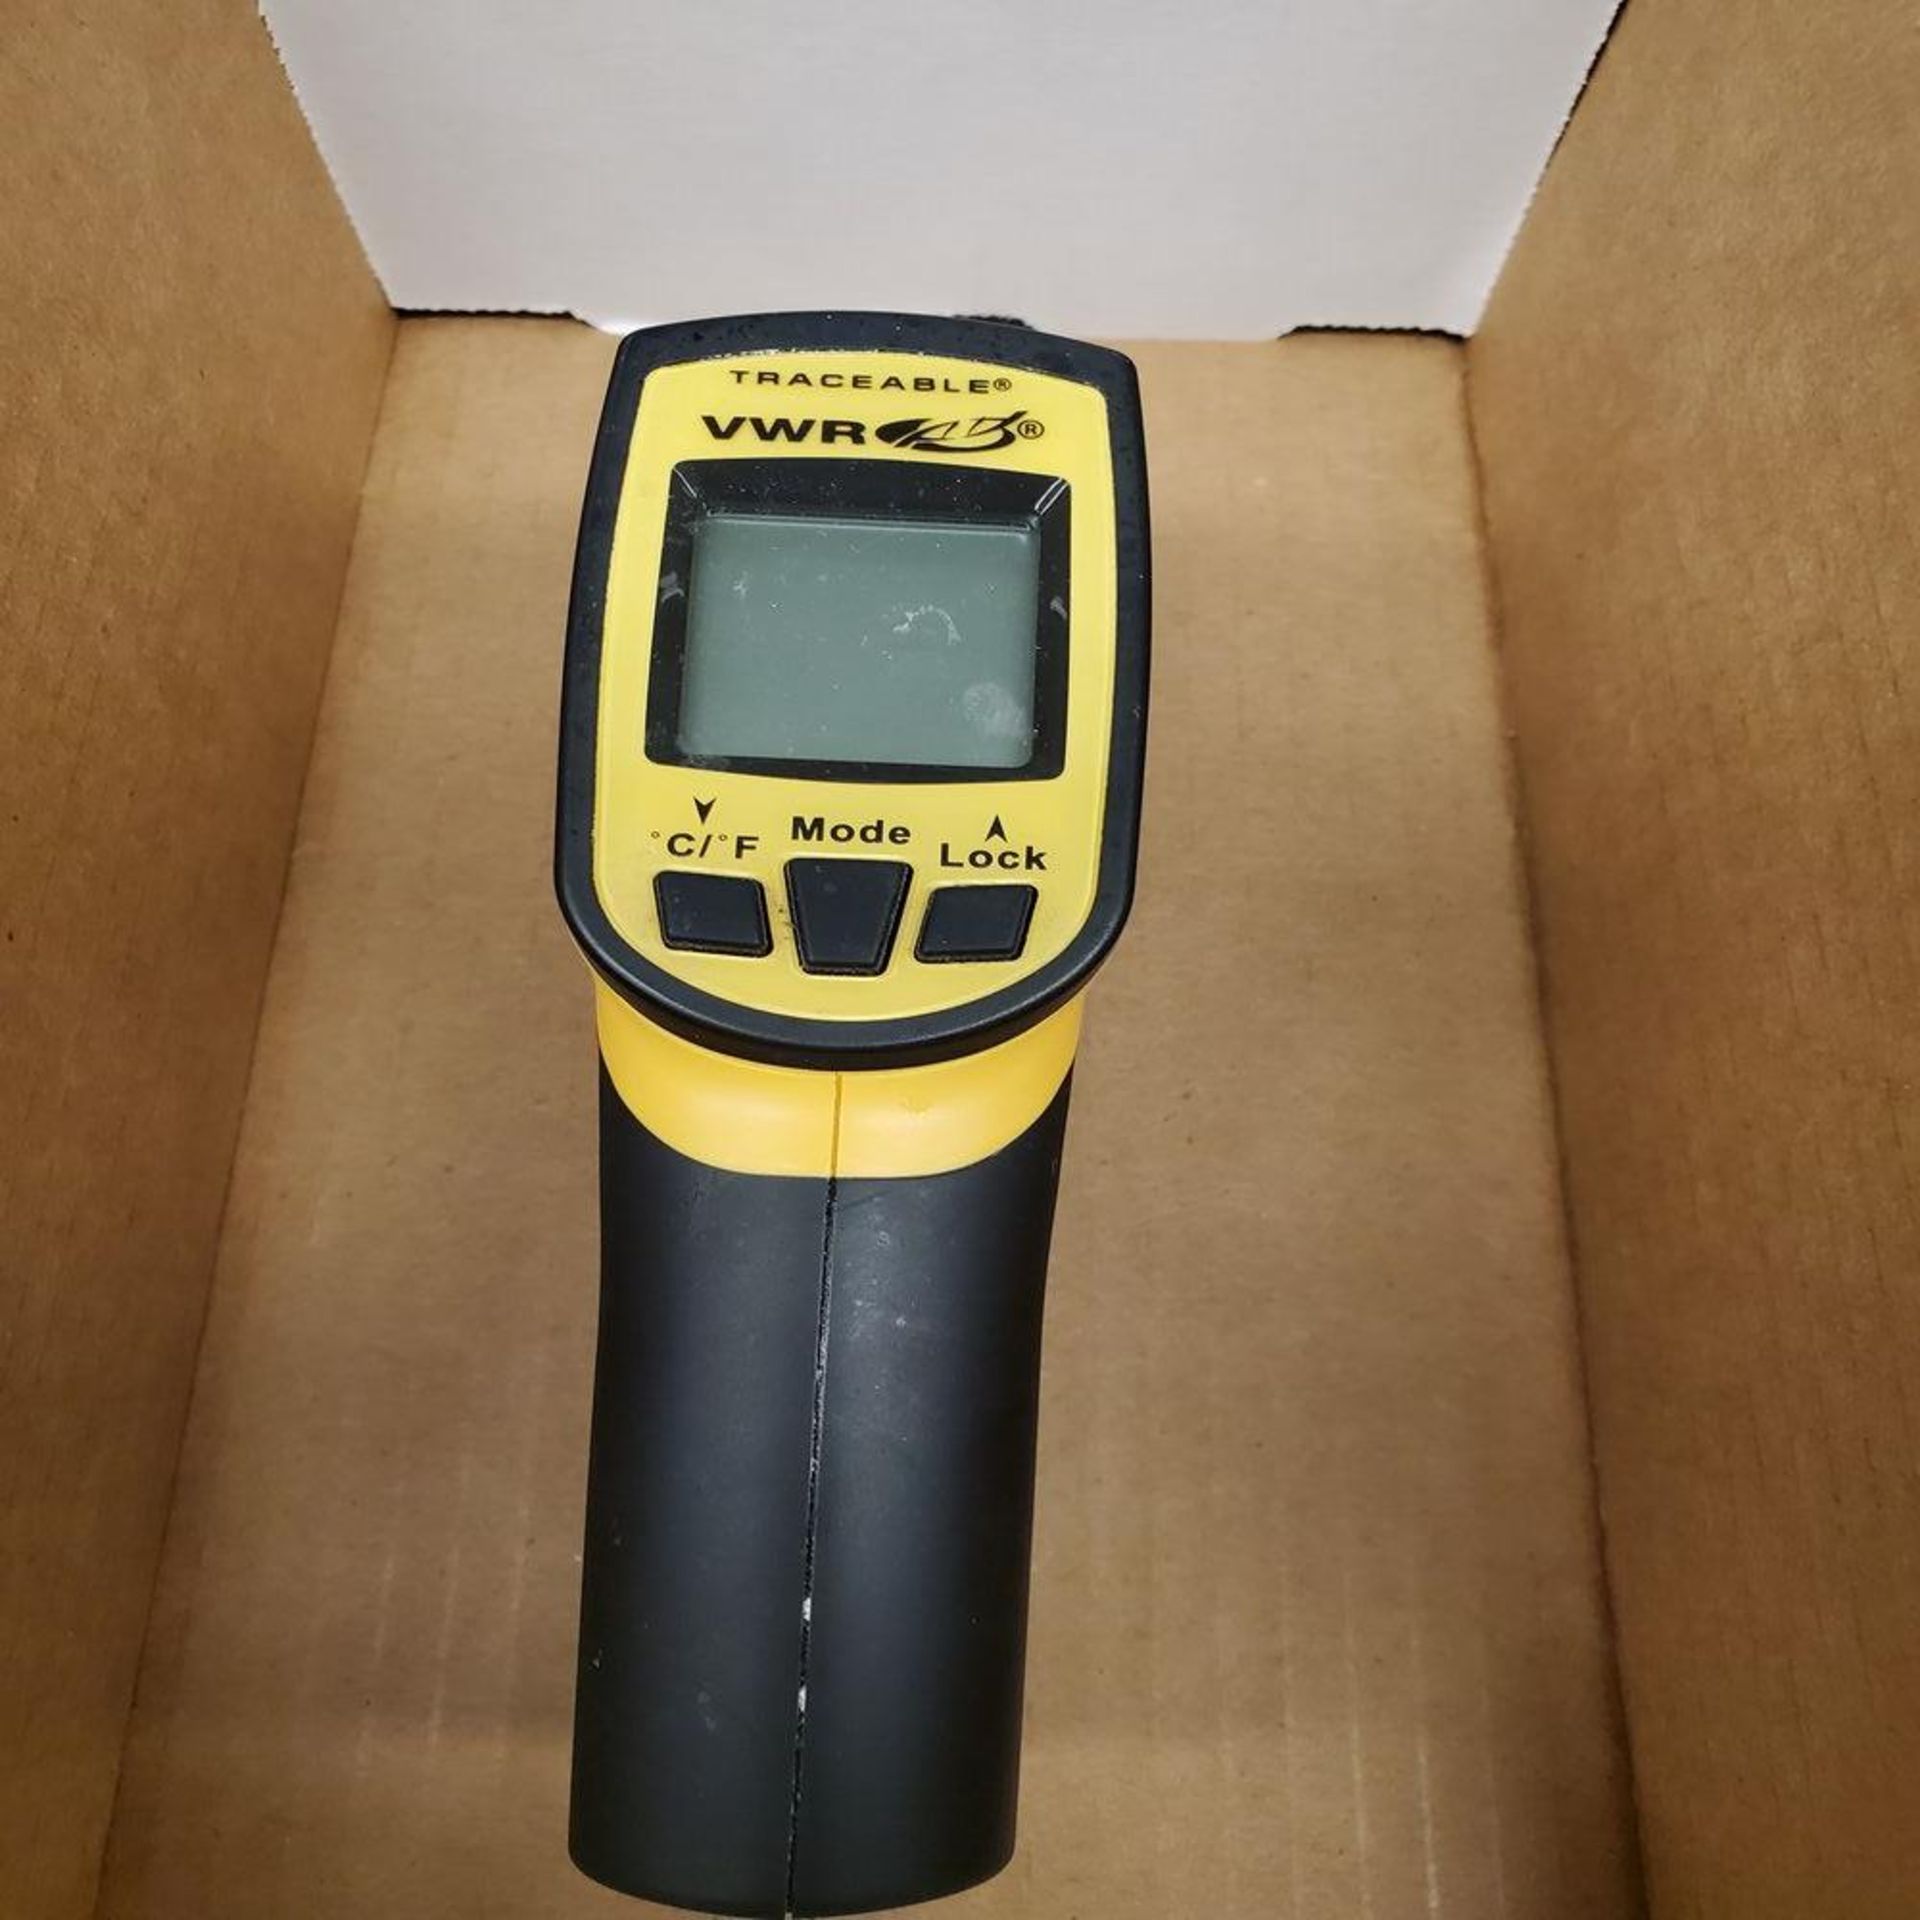 VWR Model 89140-188 I/R Thermometer - Image 2 of 4